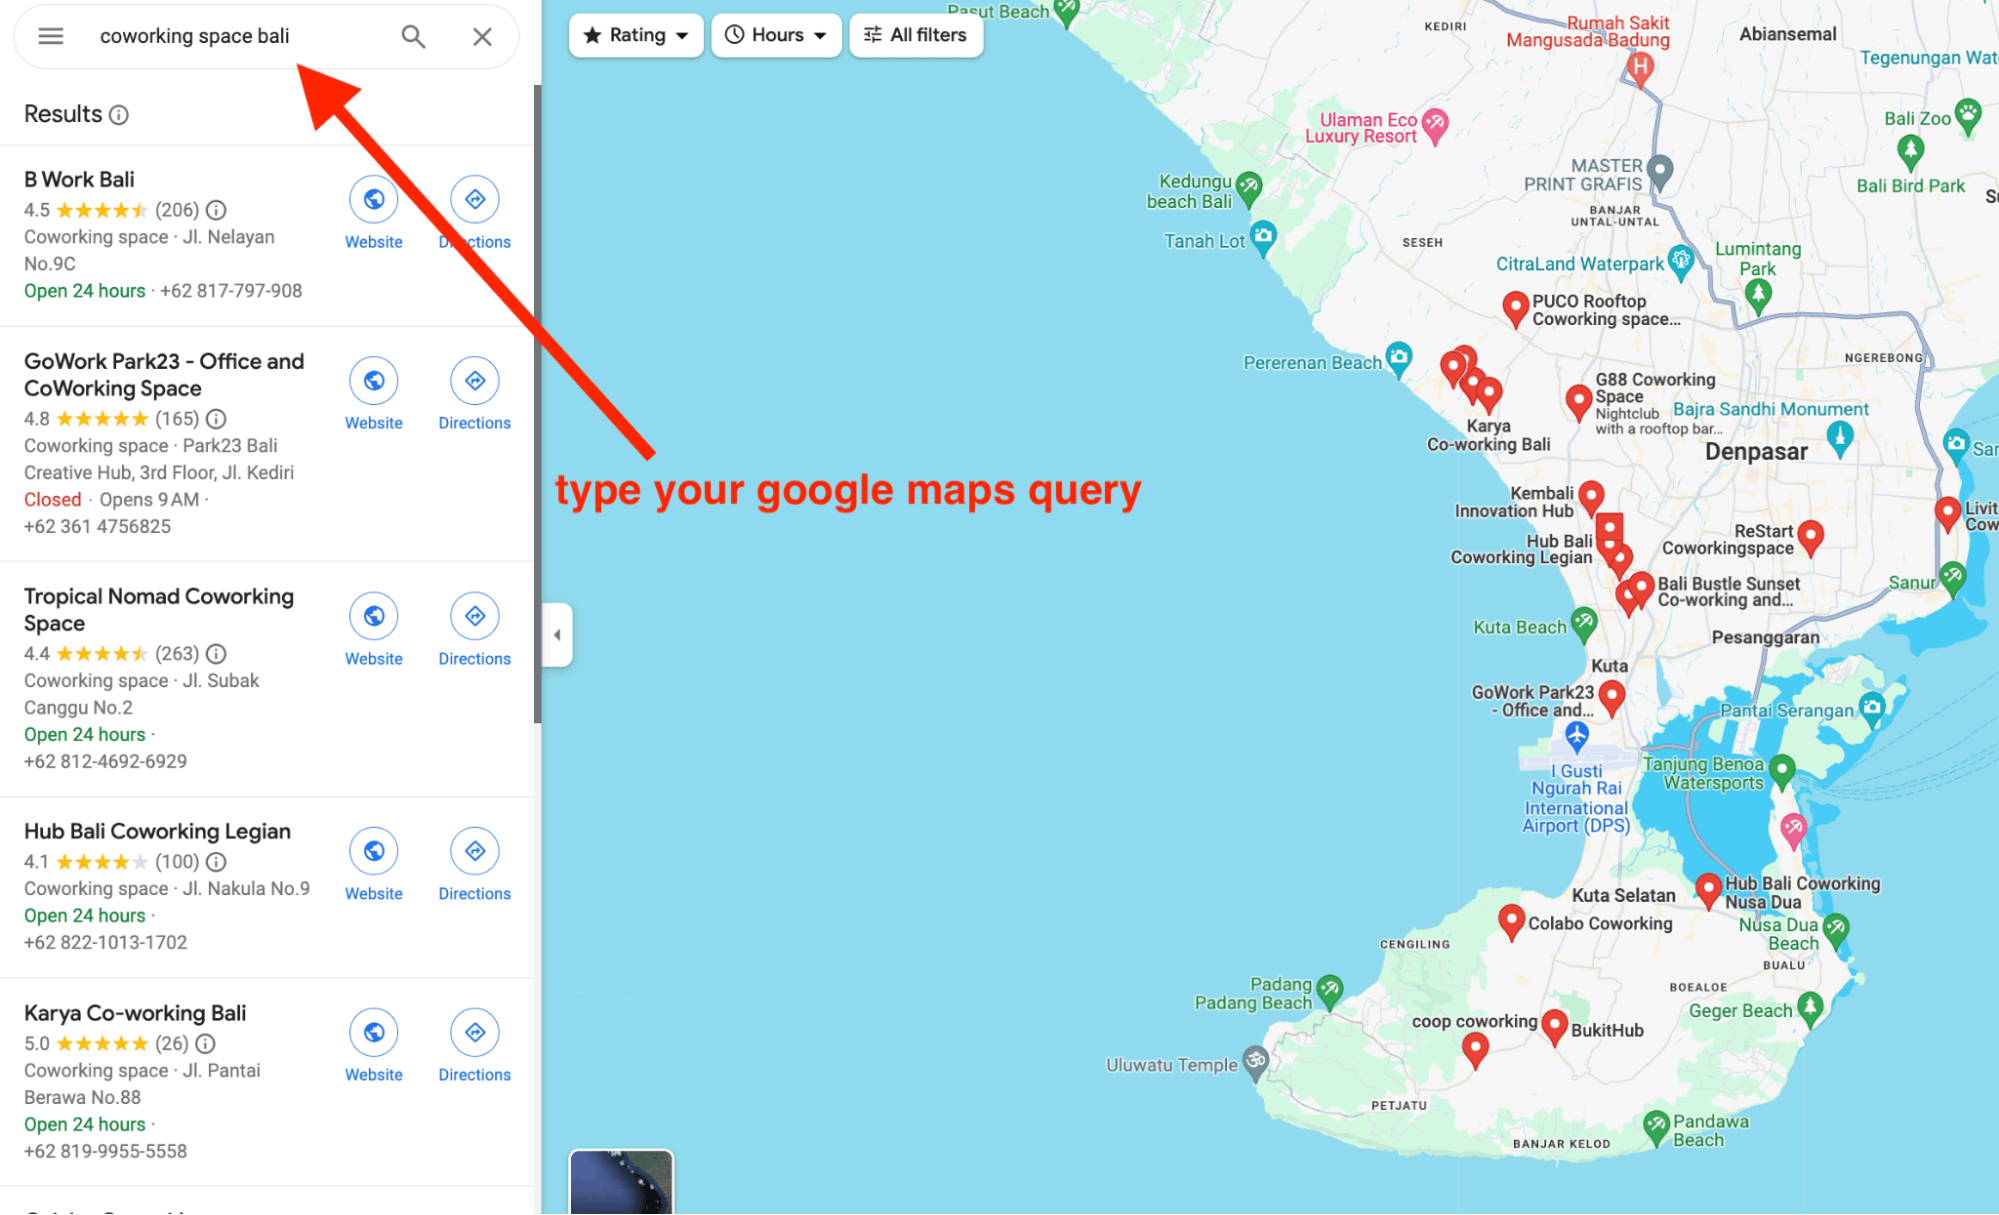 type your google maps search query - image21.png